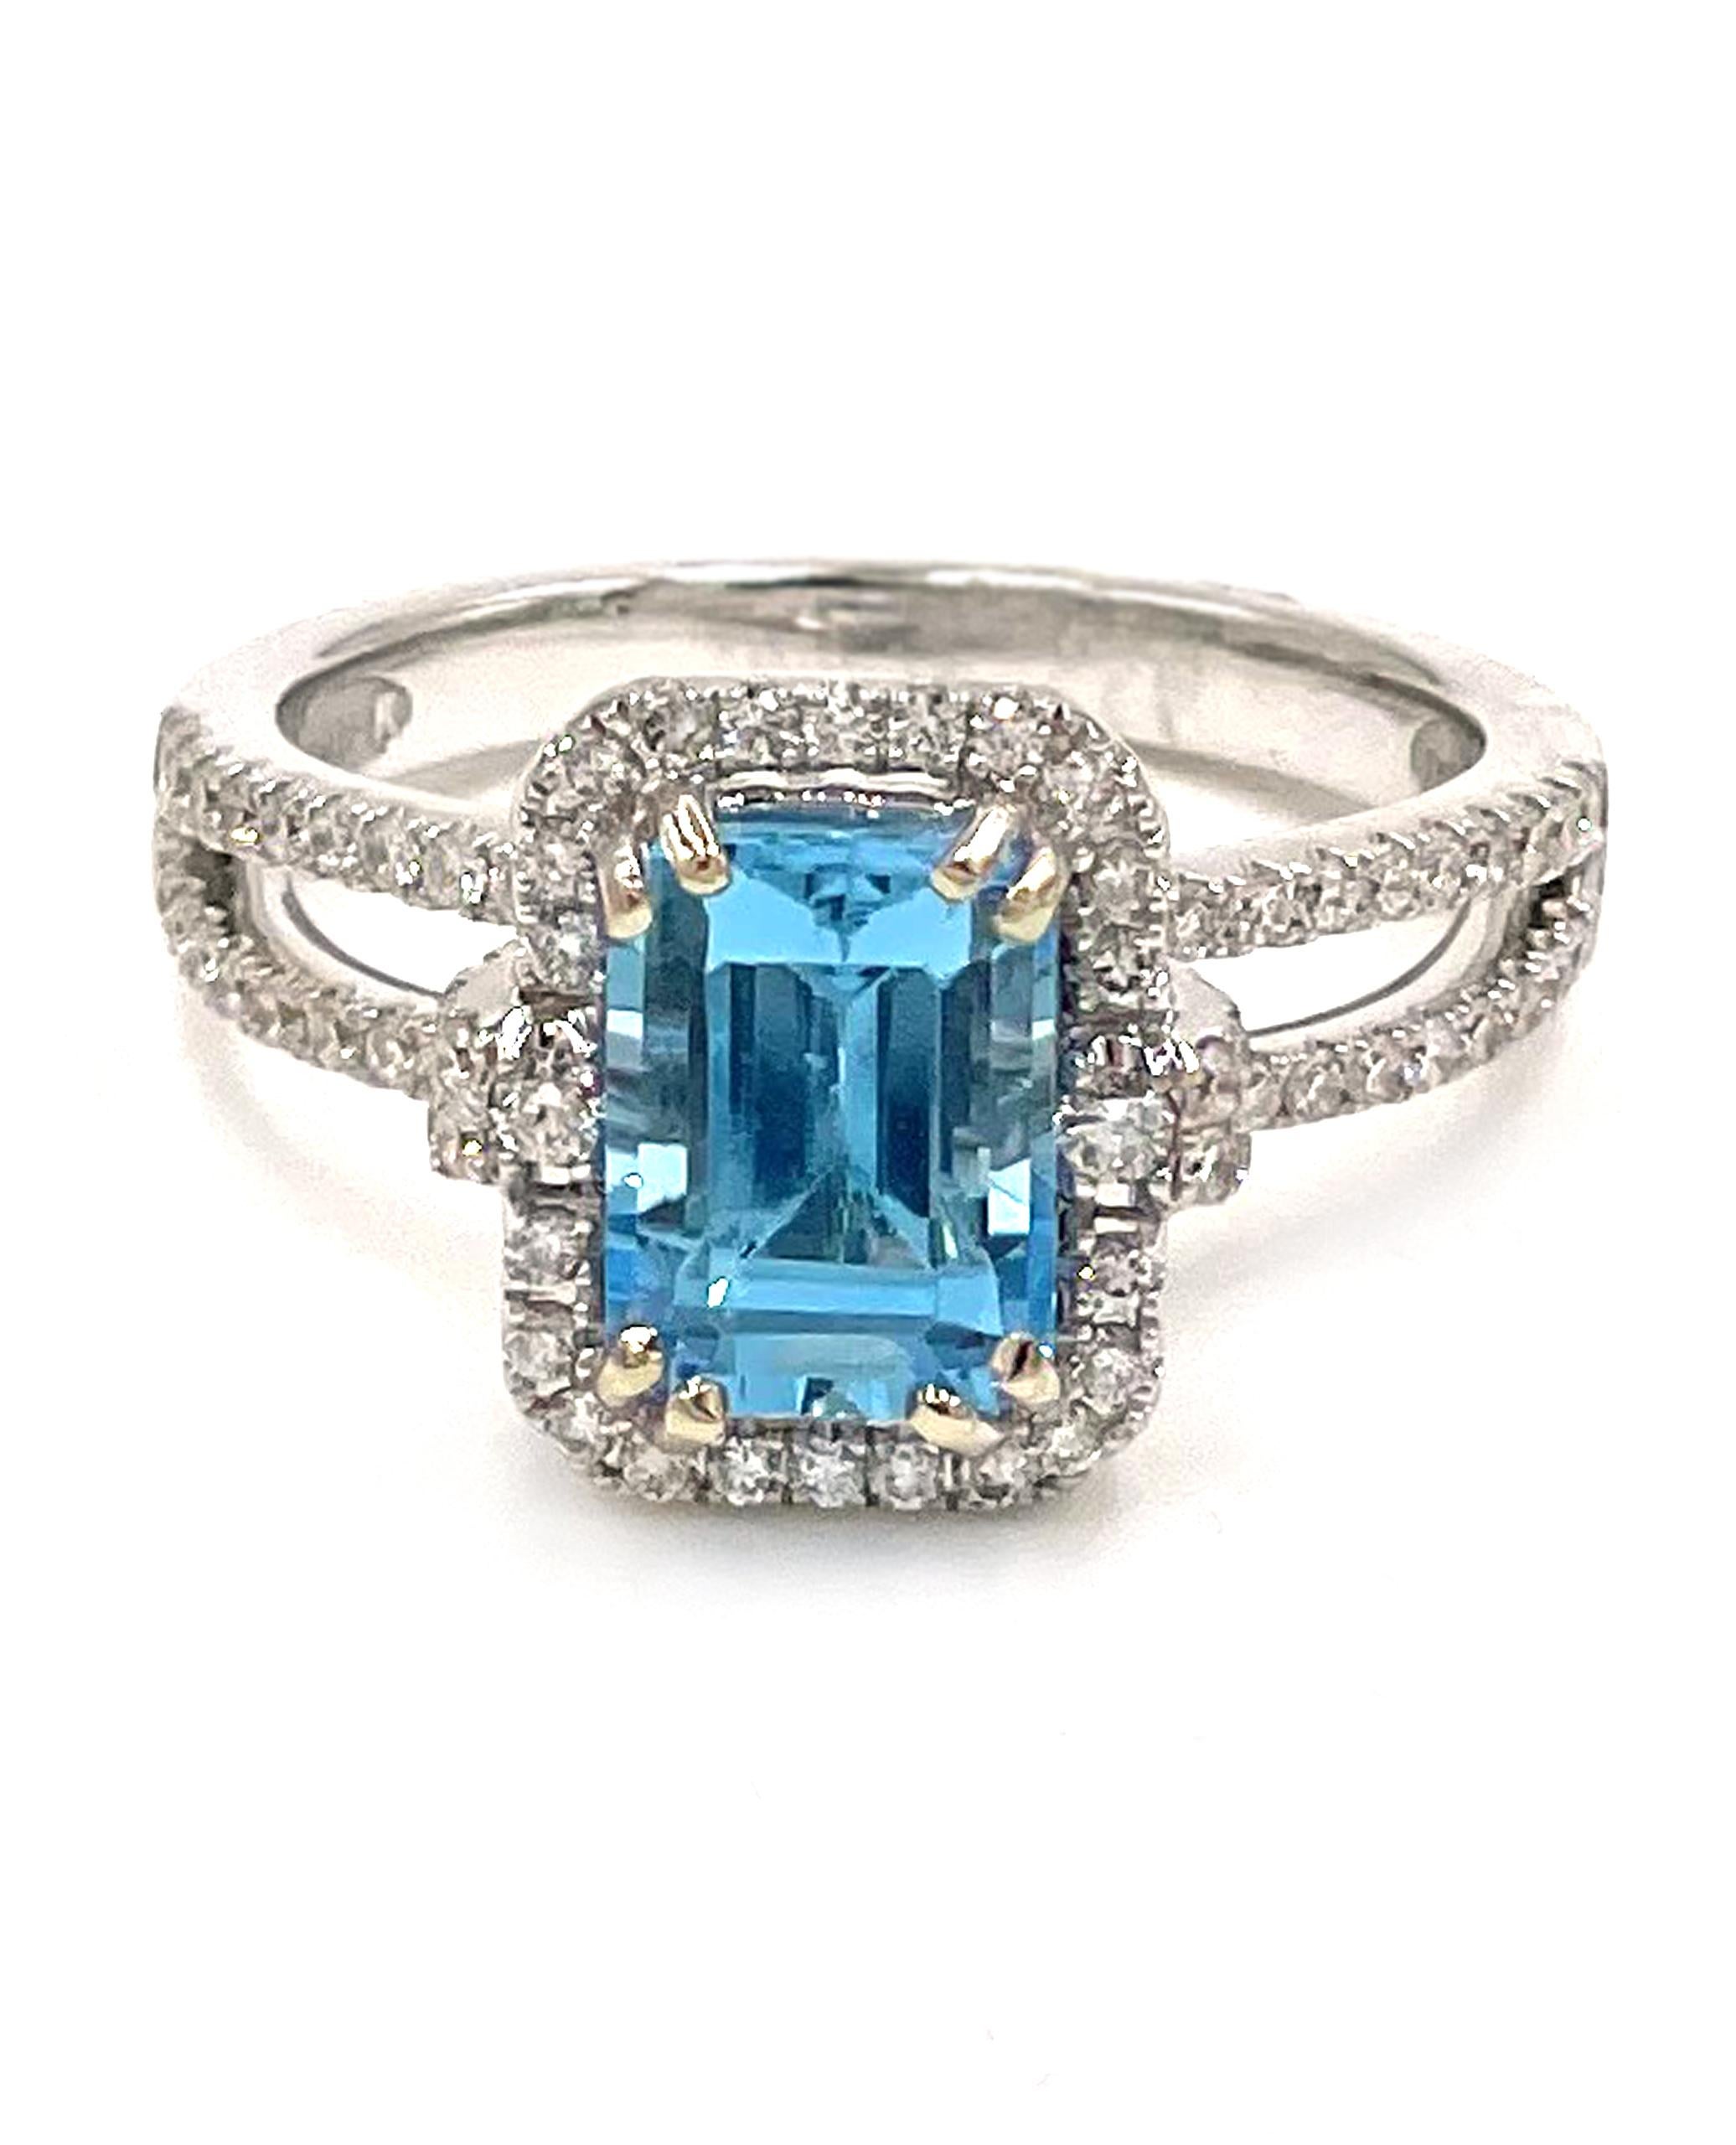 Vanna K 18RO51811DCZ 18K white gold halo ring with split shank and 84 round brilliant-cut diamonds totaling 0.55 carats. One center emerald cut Swiss blue topaz measuring 8x6mm.

* Finger size: 6.75
* Diamonds are G color, VS2/SI1 clarity.